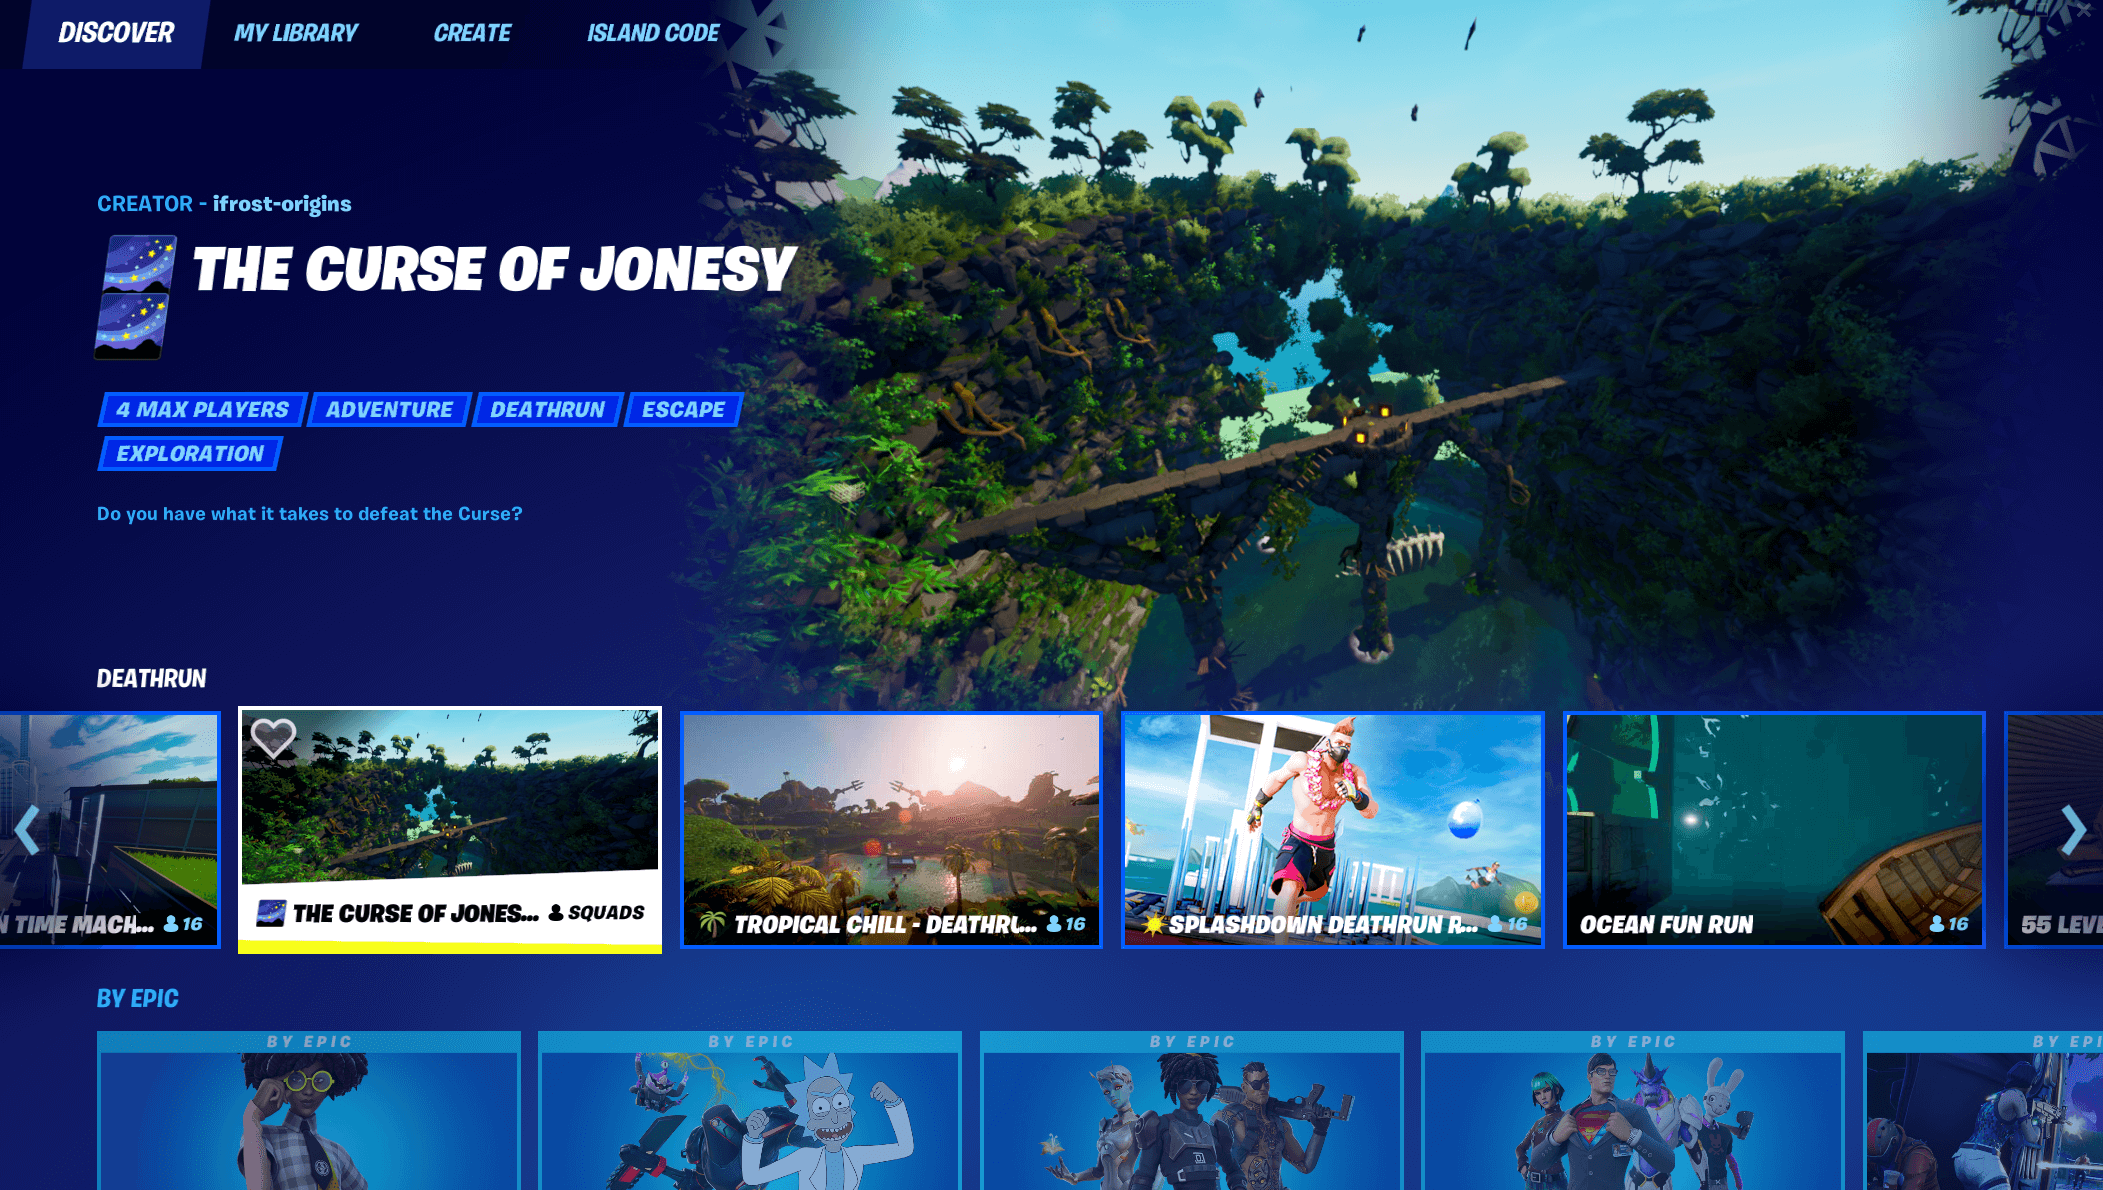 Fortnite devs responds to Discover Tab backlash, promises changes soon